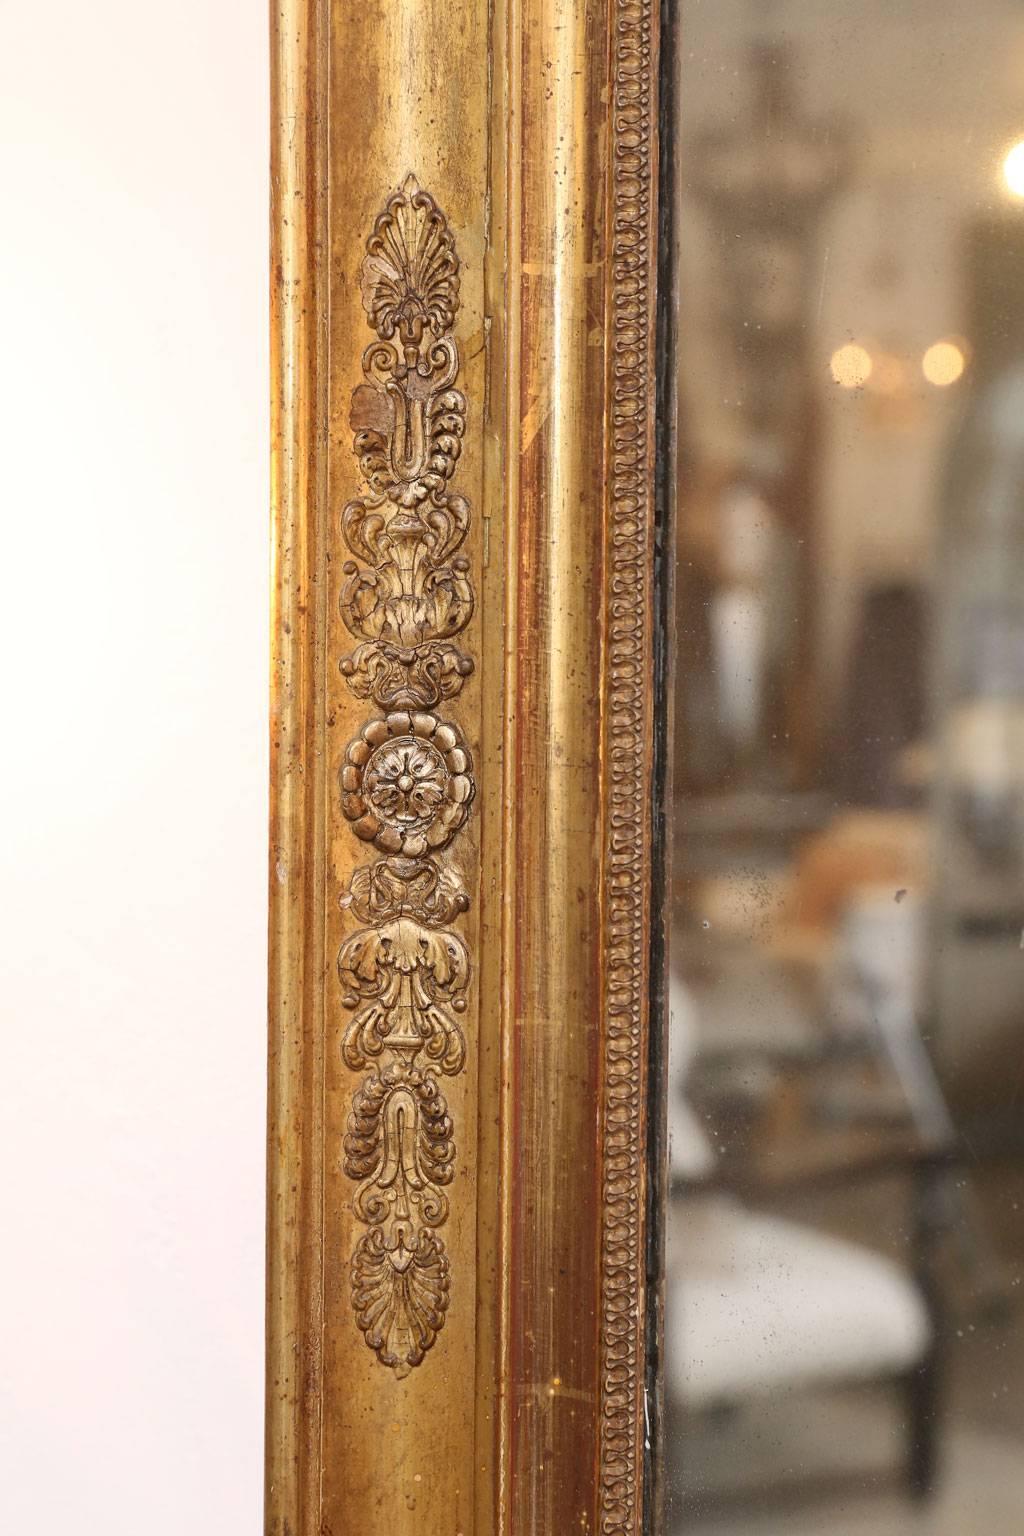 Large giltwood Empire mirror, (circa 1820-1840), with palmettes en doré motif along frame and its original silvered mercury plate mirror (two pieces), that features a gorgeous 'diamond dust' effect across its surface.